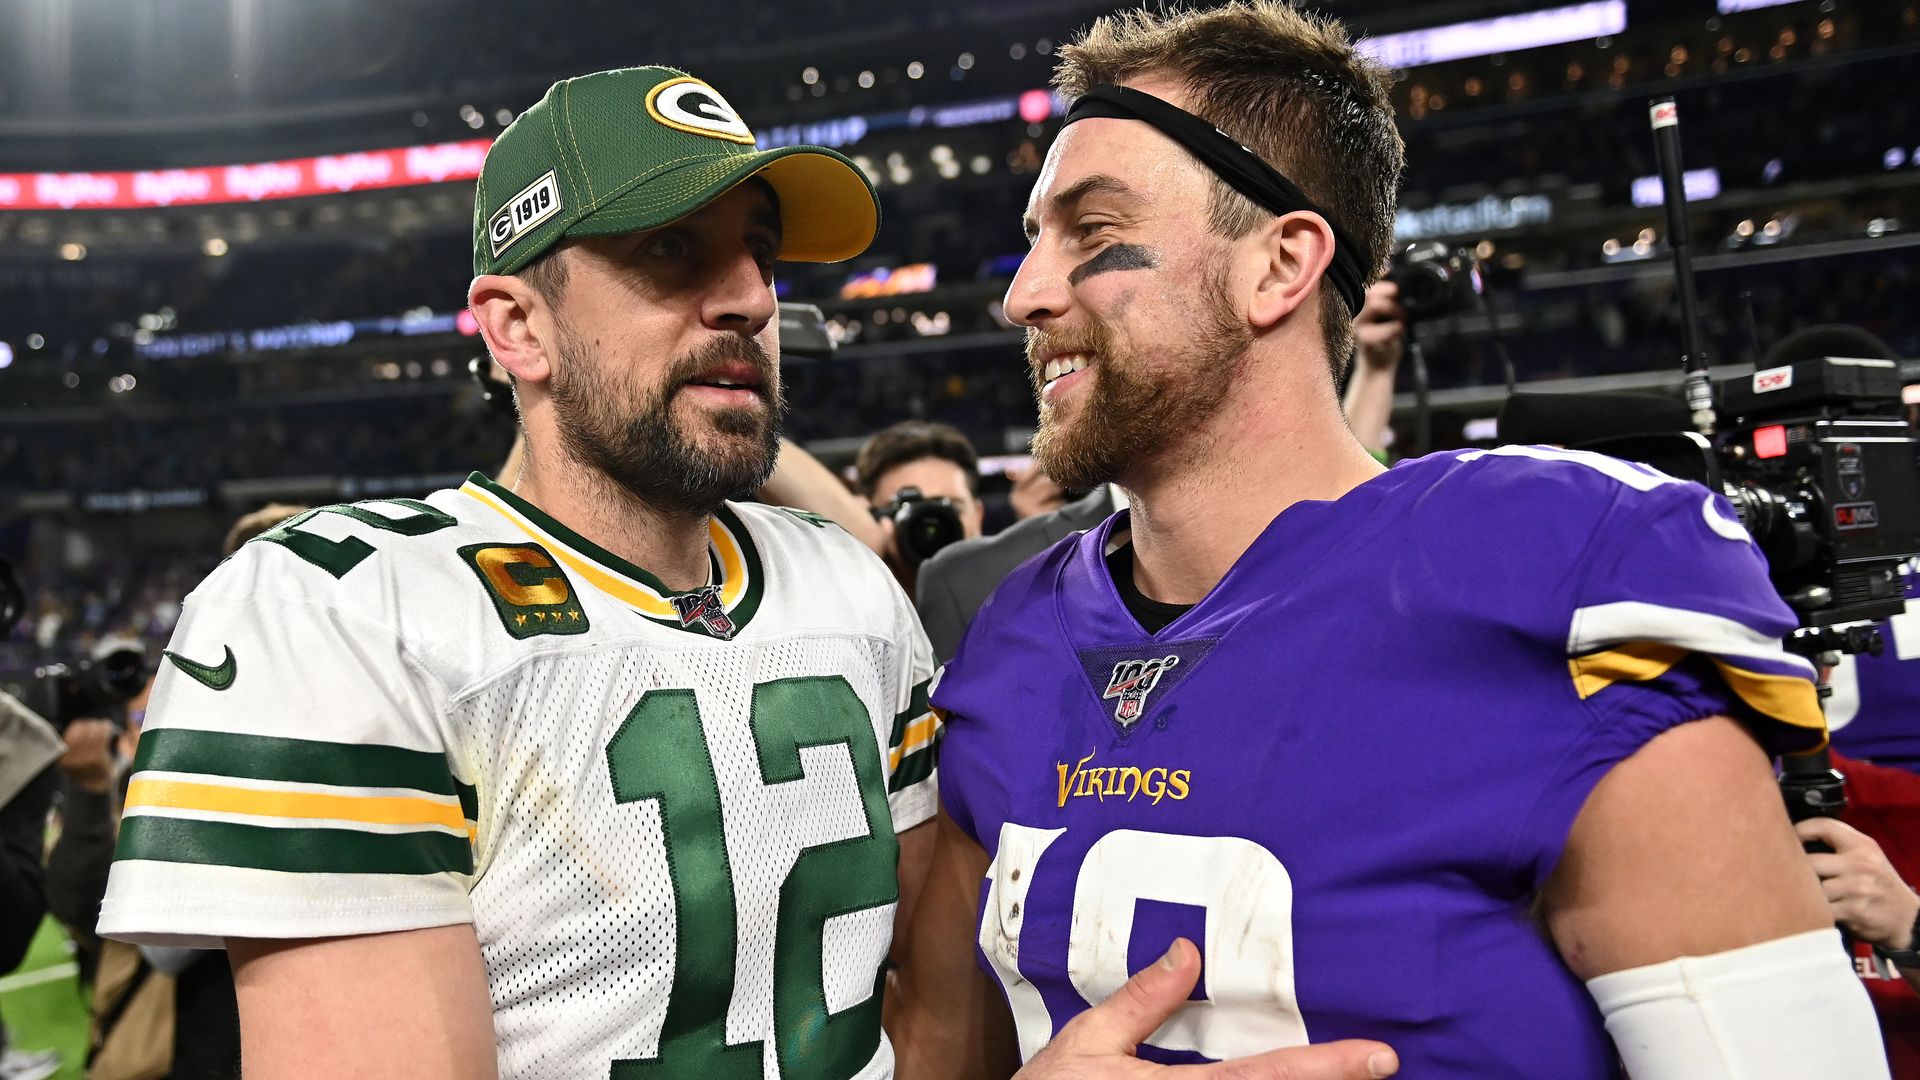 Aaron Rodgers embraces Adam Thielen after a Vikings game